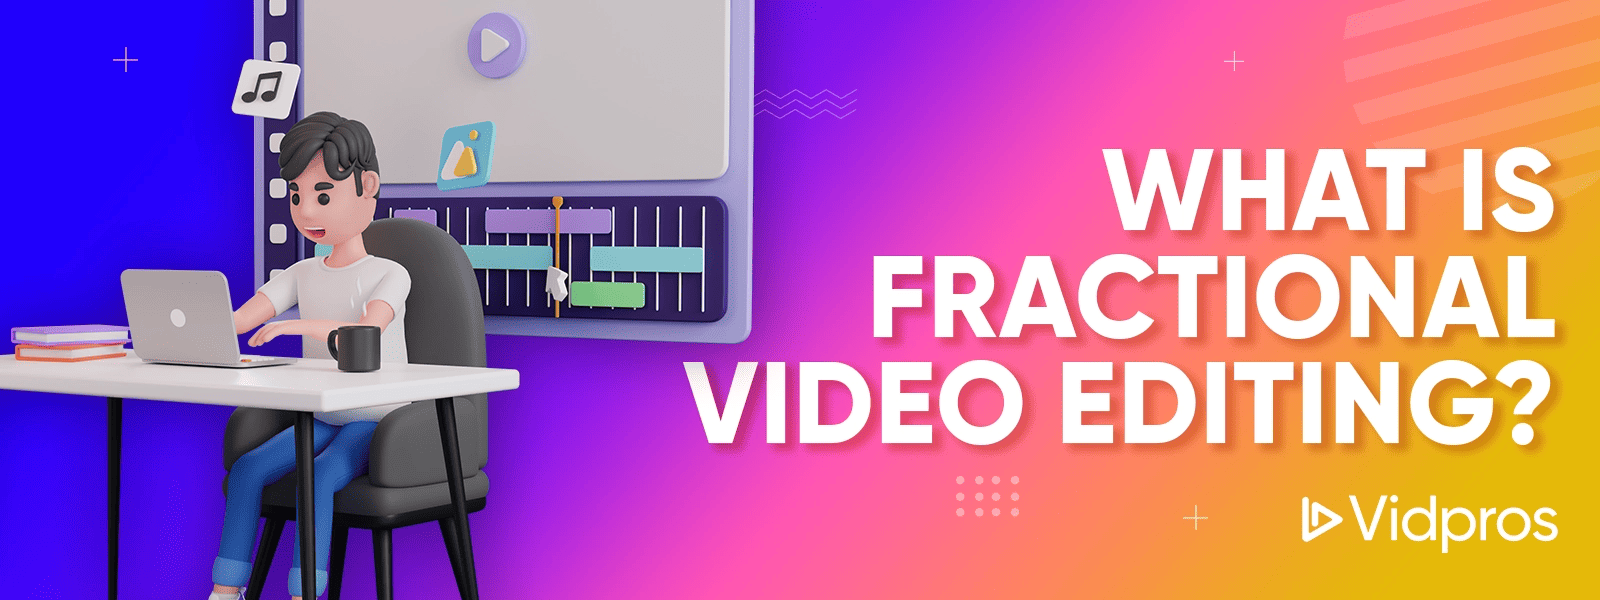 Fractional Video Editing